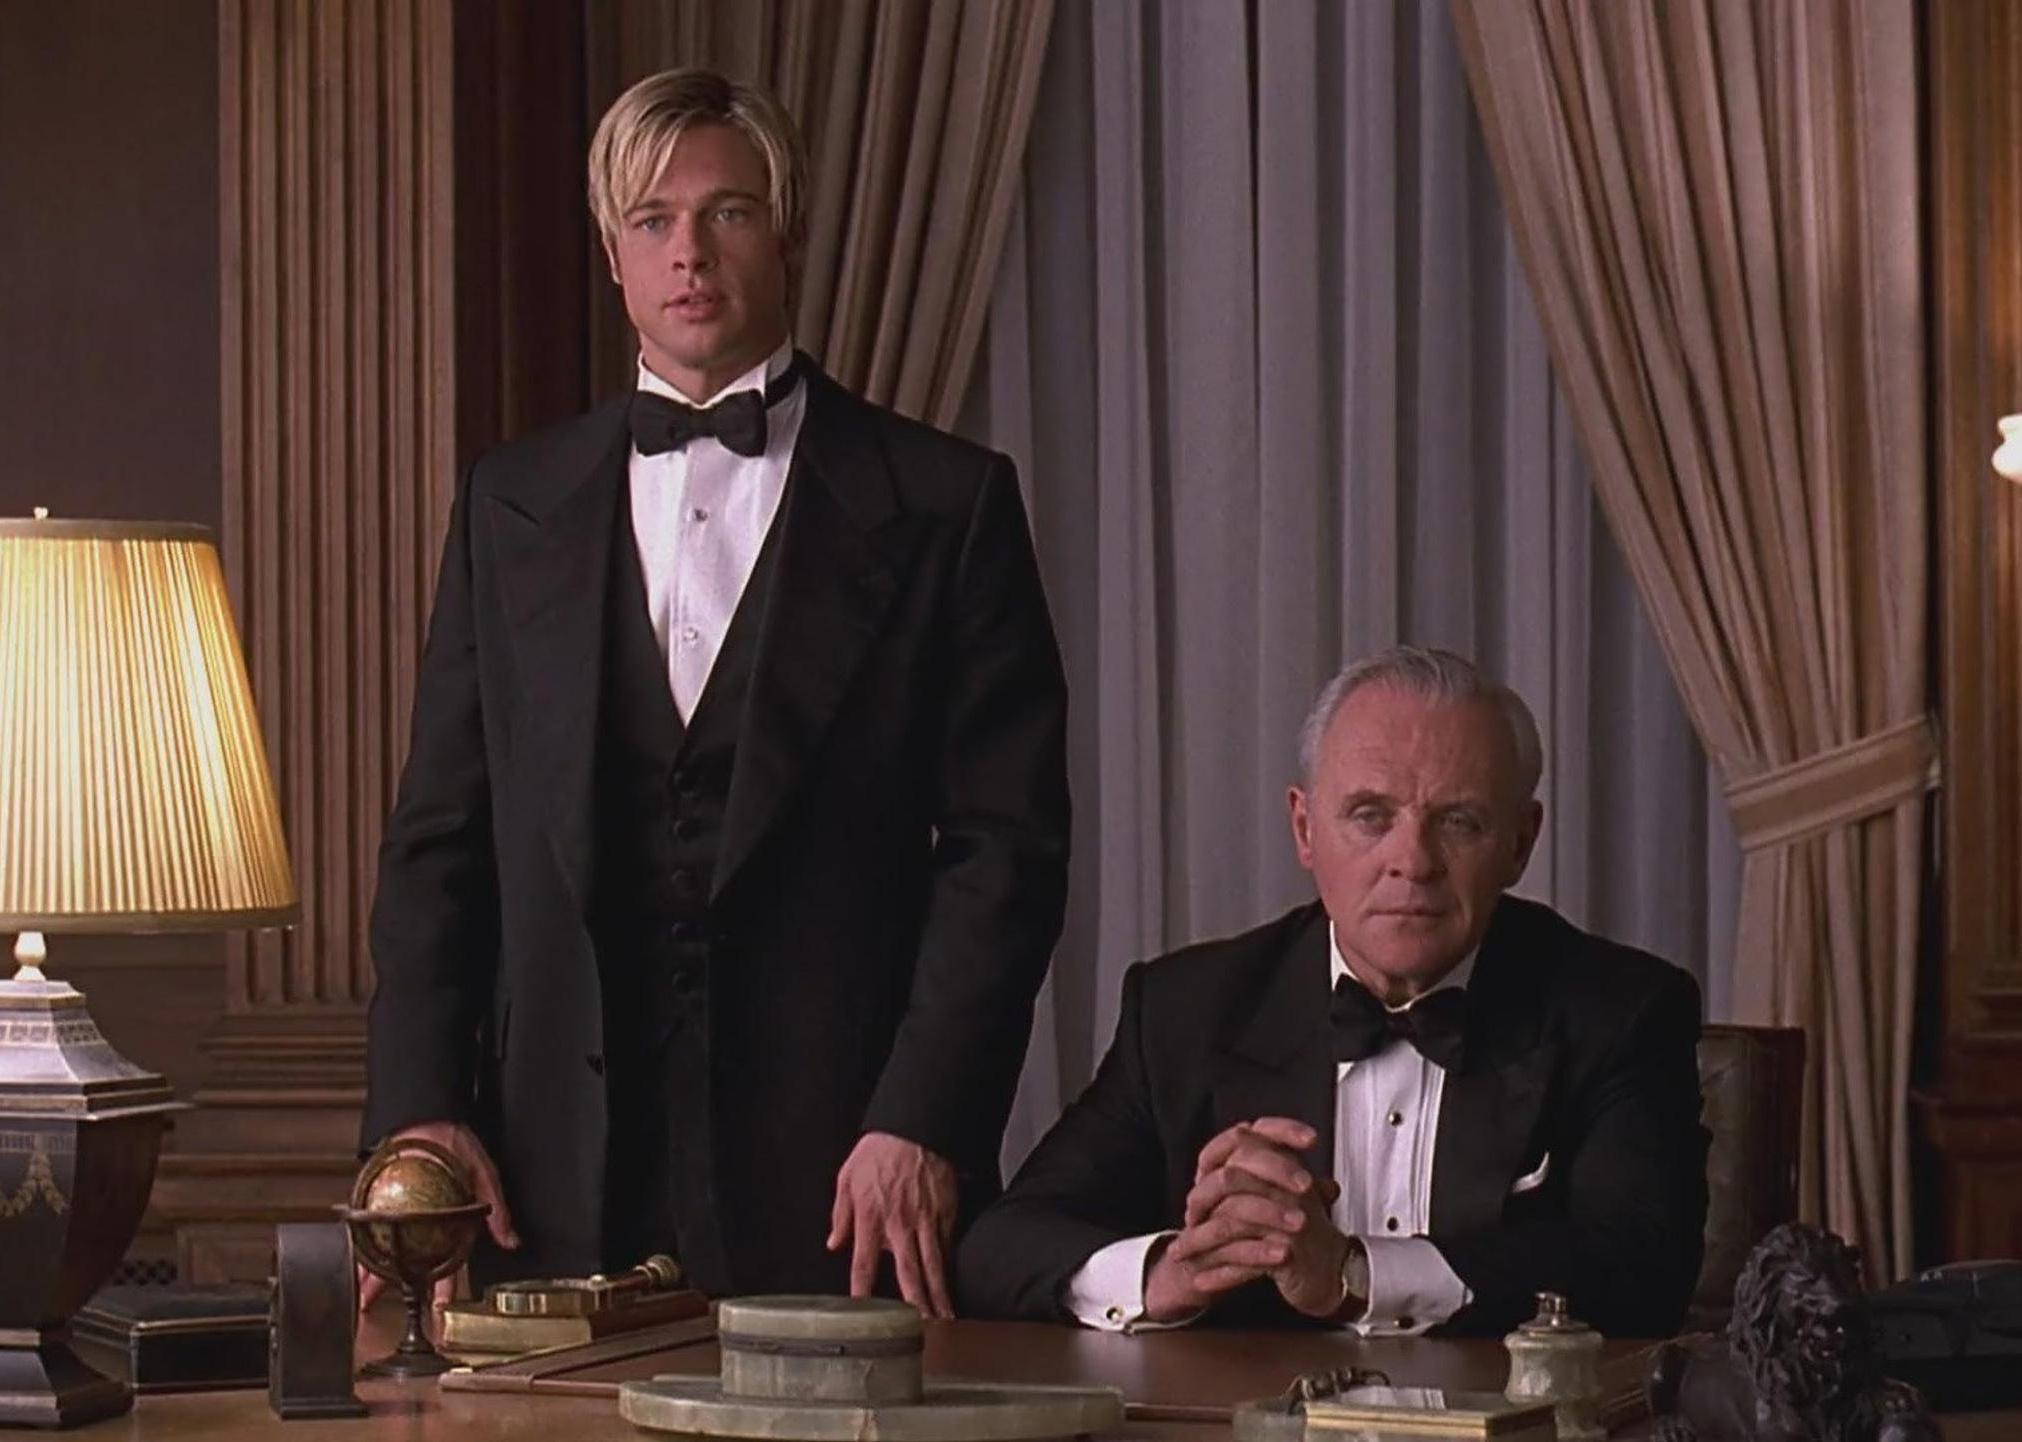 Brad Pitt standing next to Anthony Hopkins, who is seated at a desk, both dressed in suits and bowties.